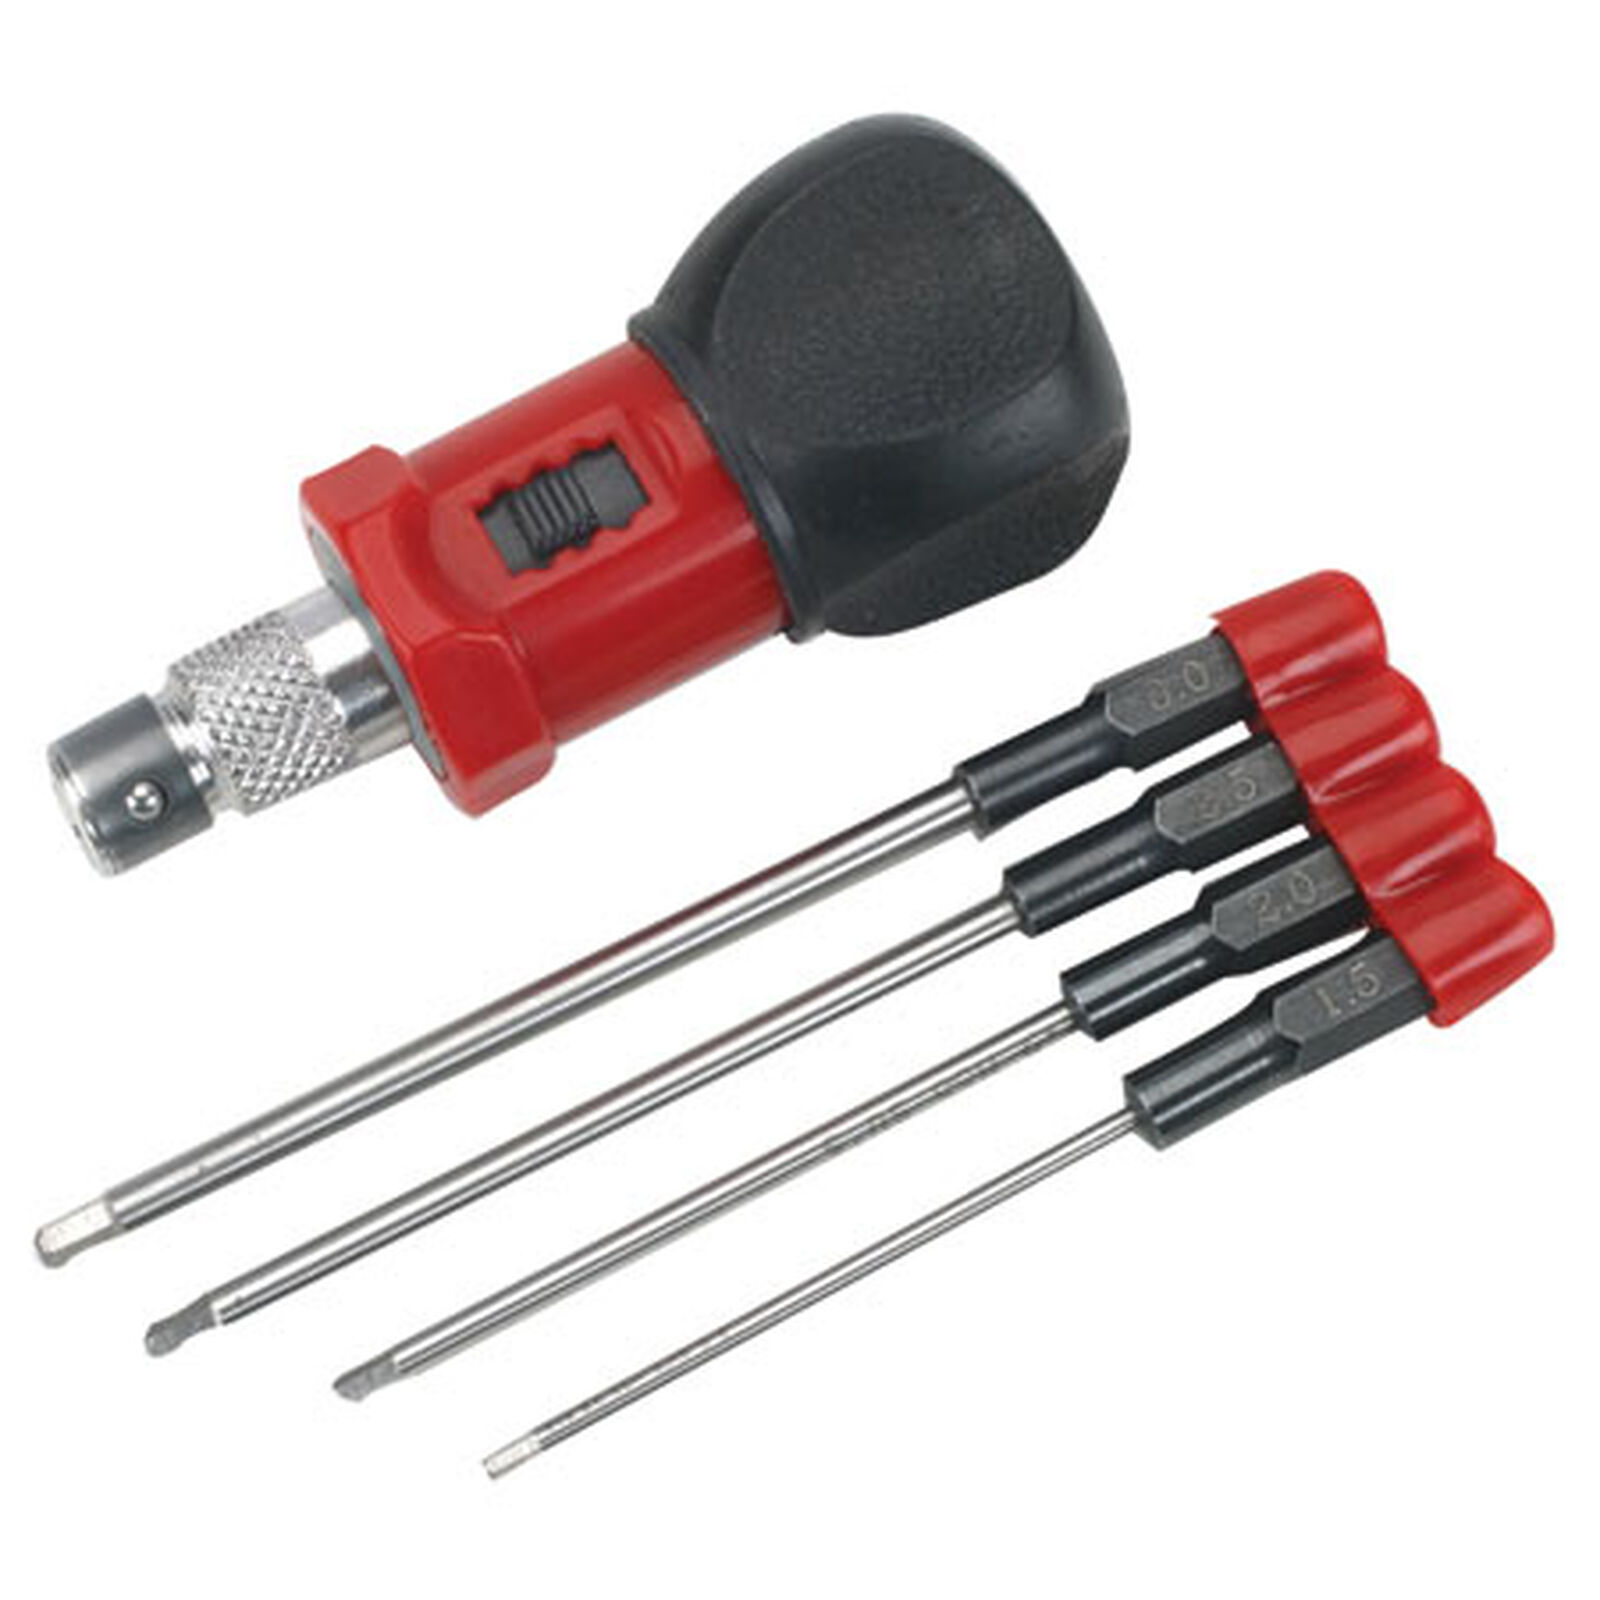 4-Piece Metric Hex Wrench Set with Handle